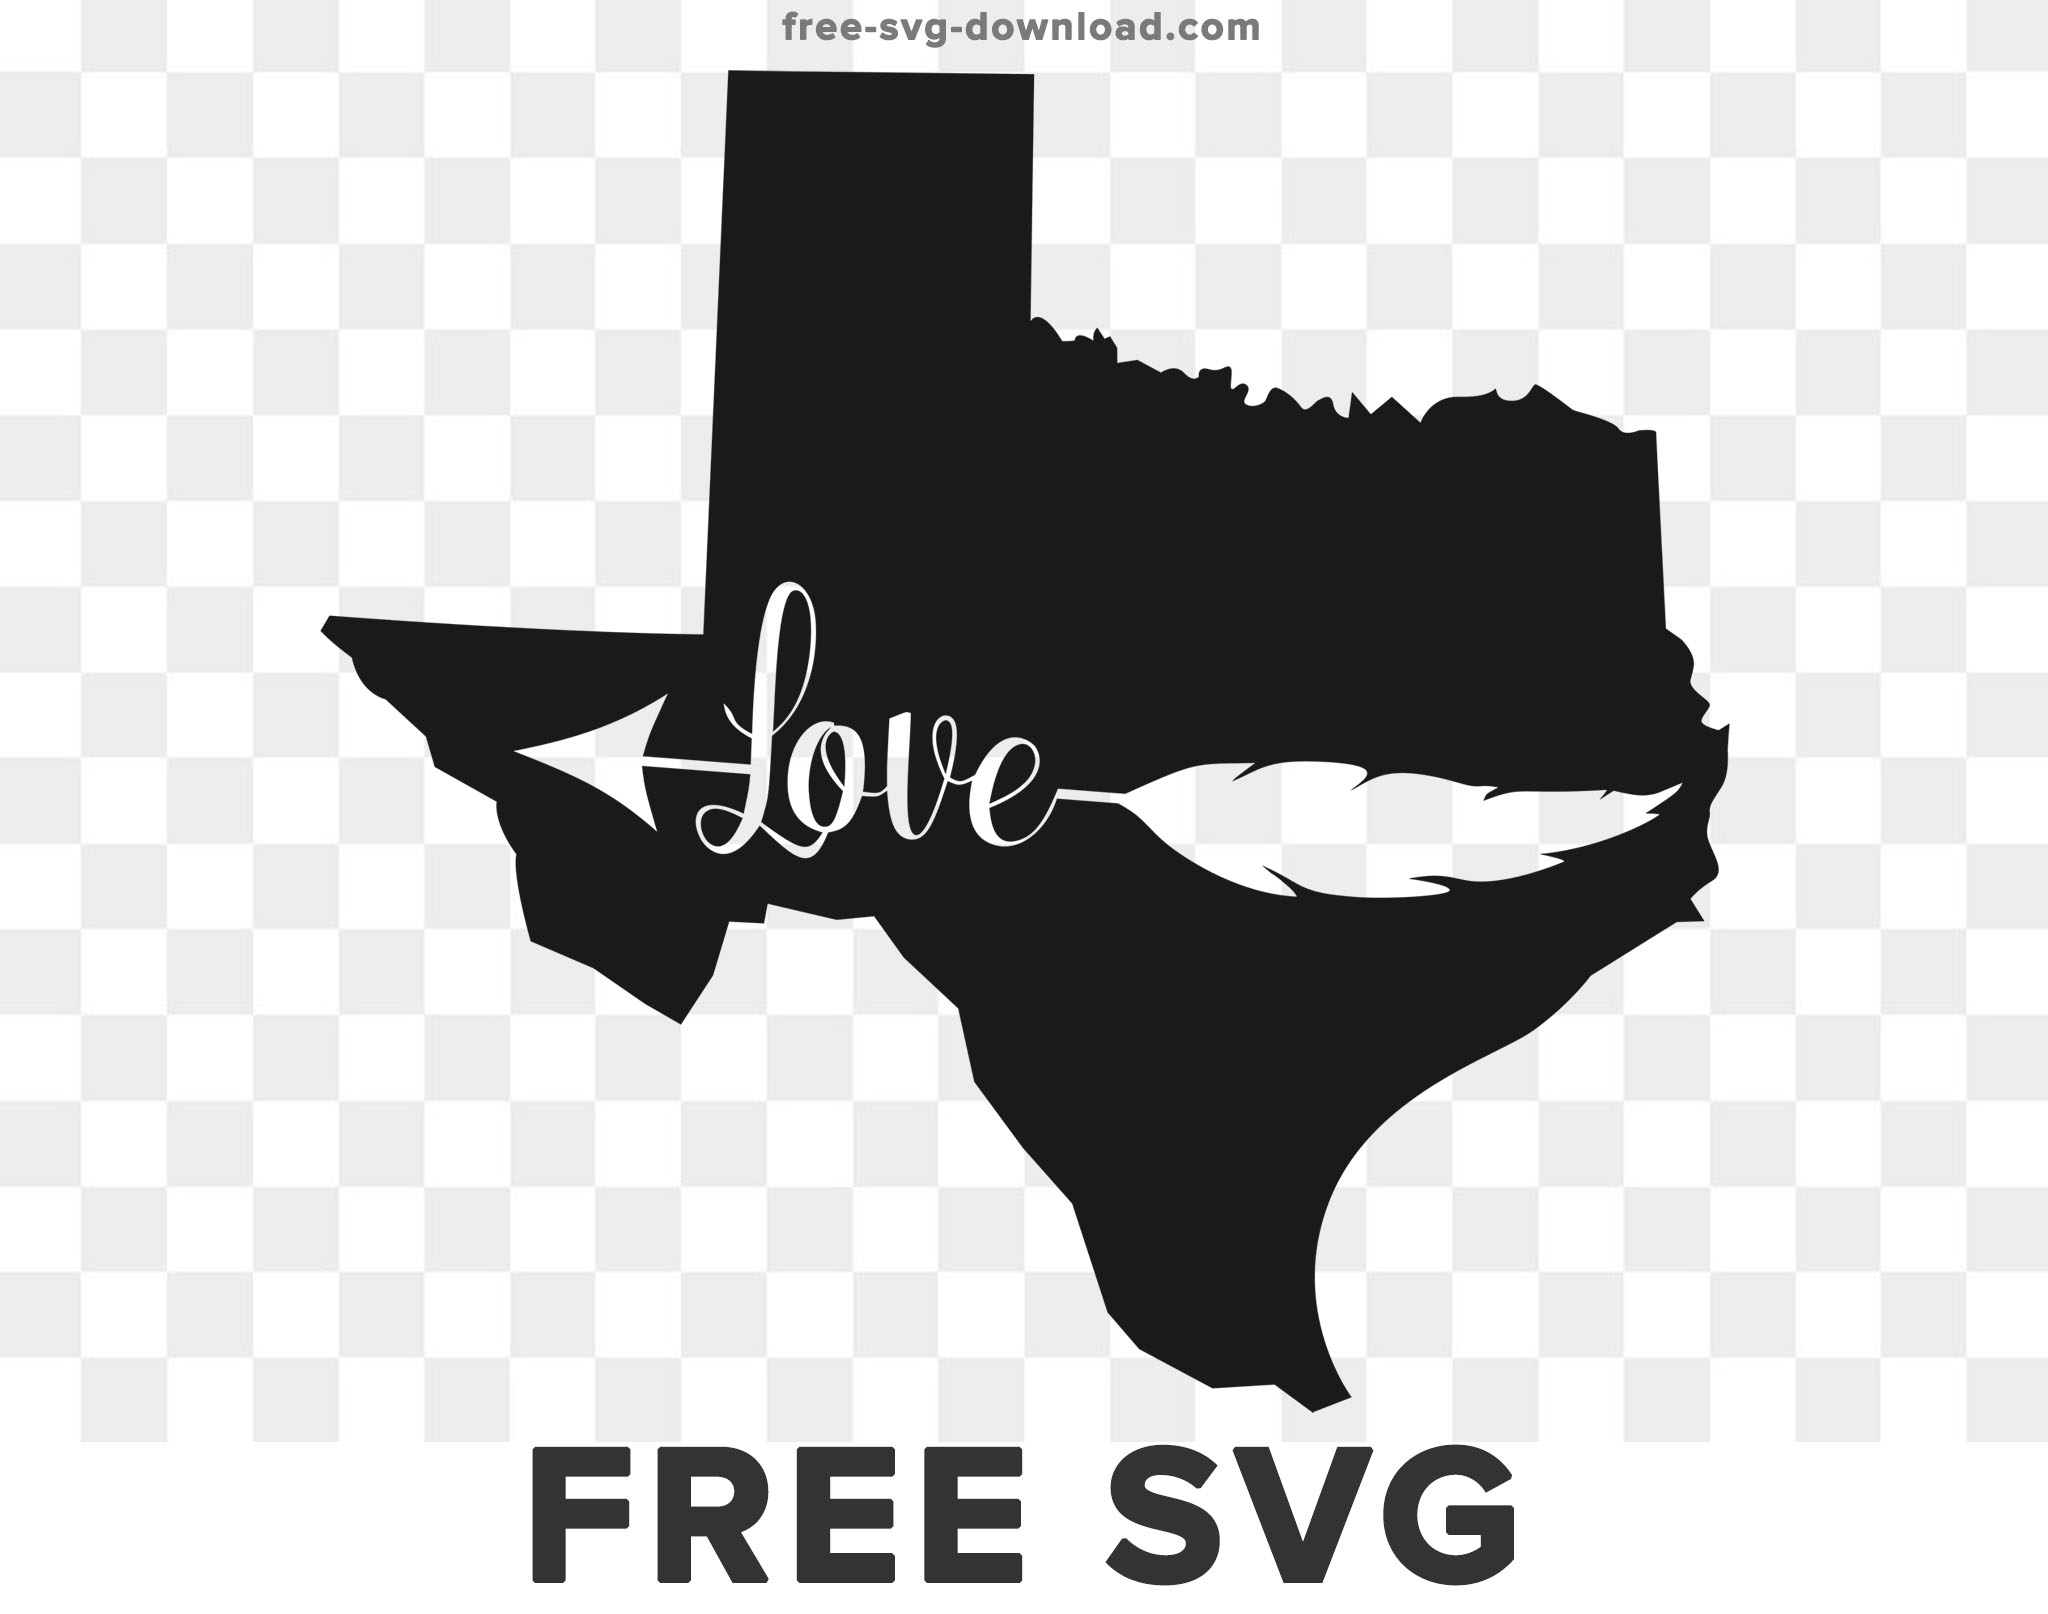 Texas State Svg Cut File